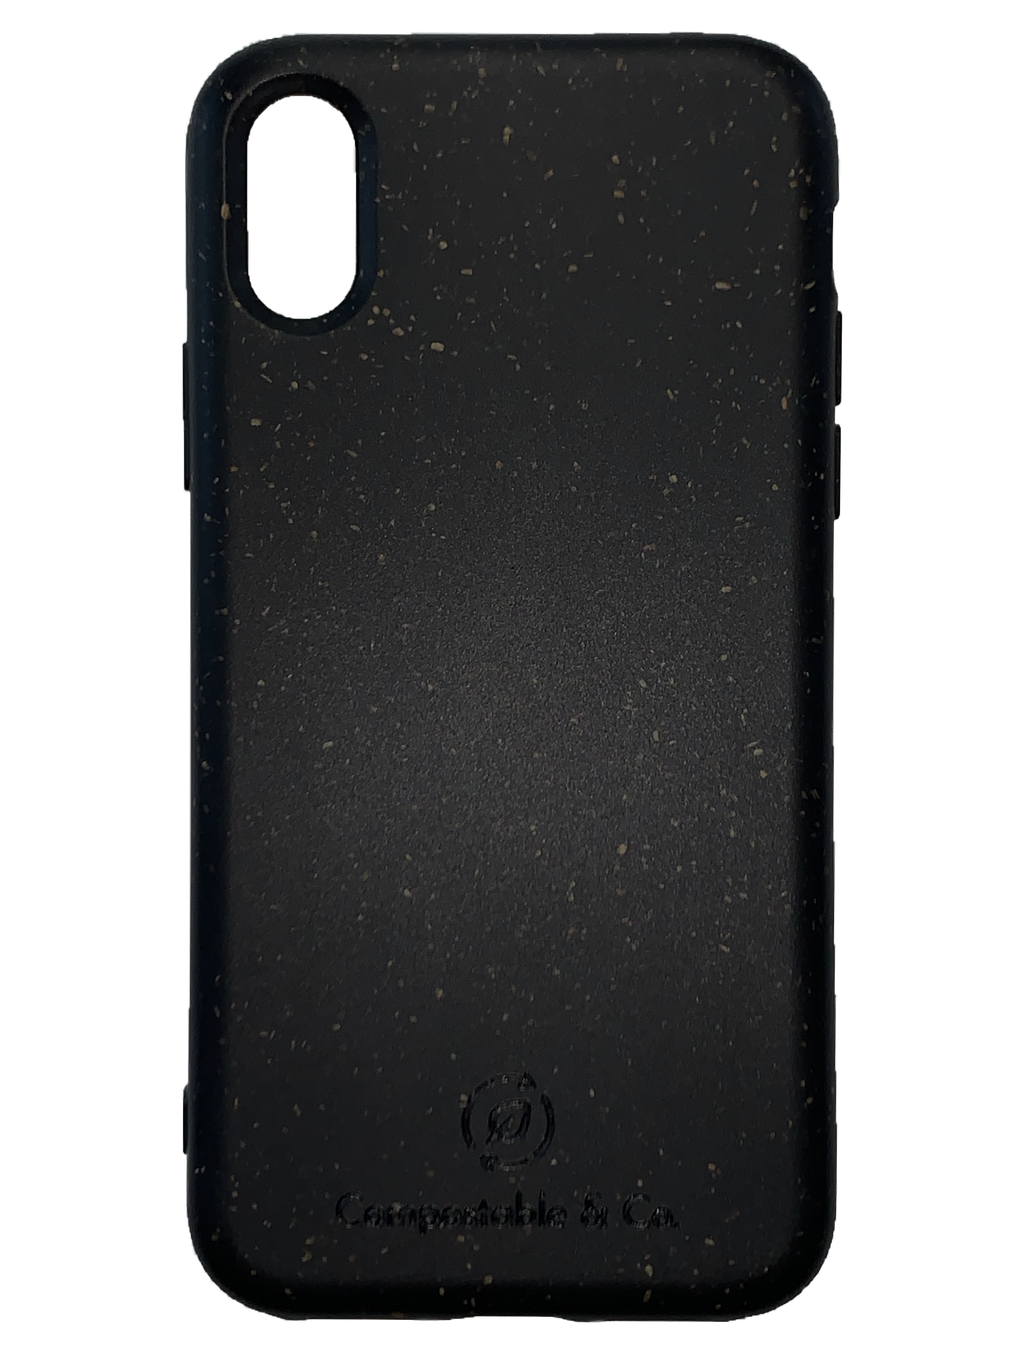 Compostable & Co. iPhone x / xs black biodegradable phone case